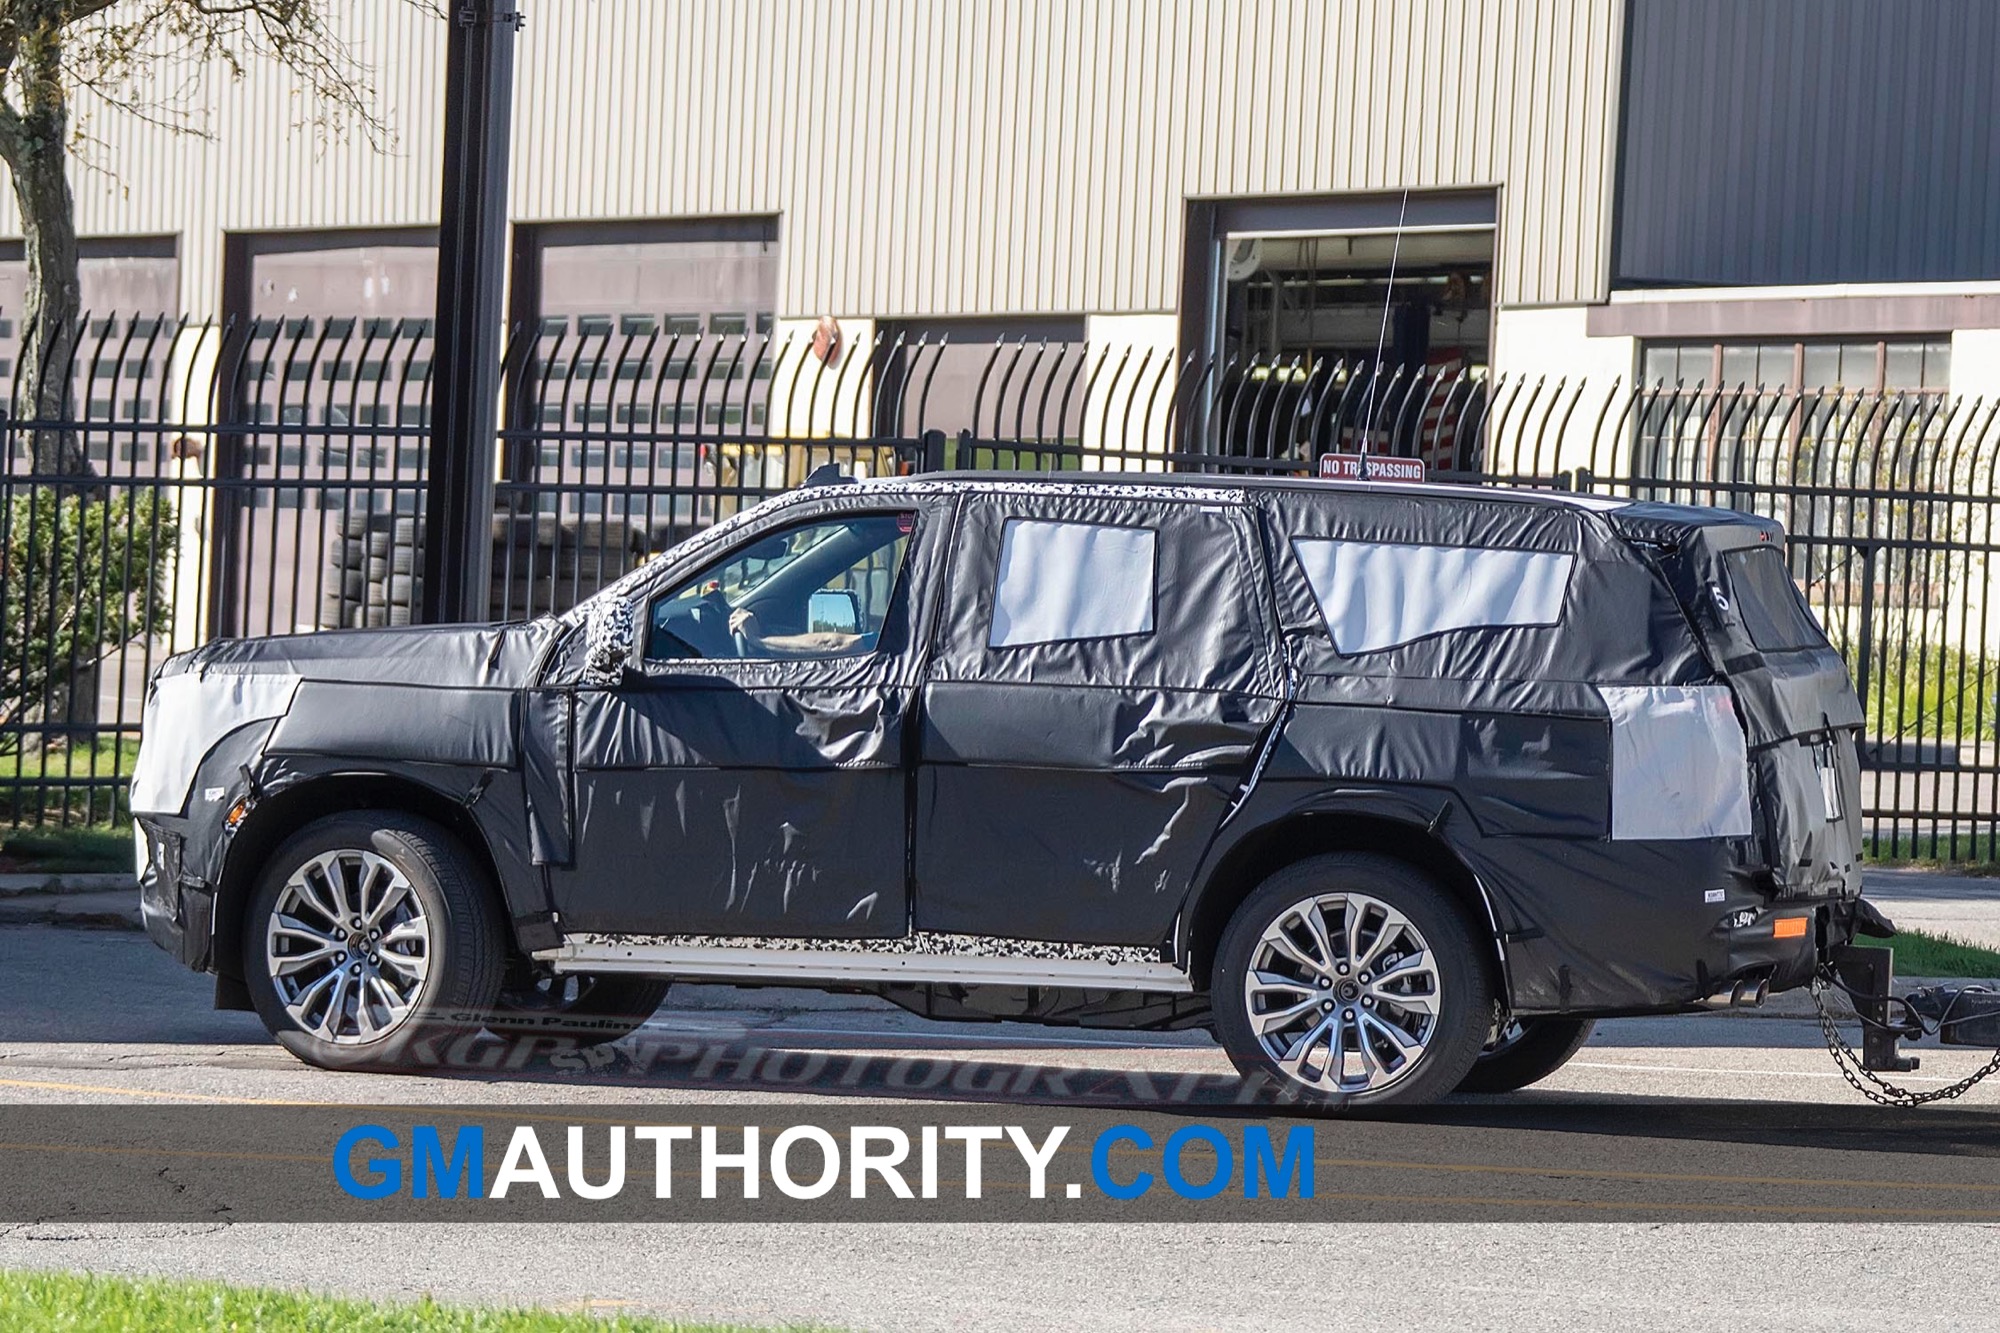 2020 Gmc Yukon Prototype Caught Testing For The First Time Gm